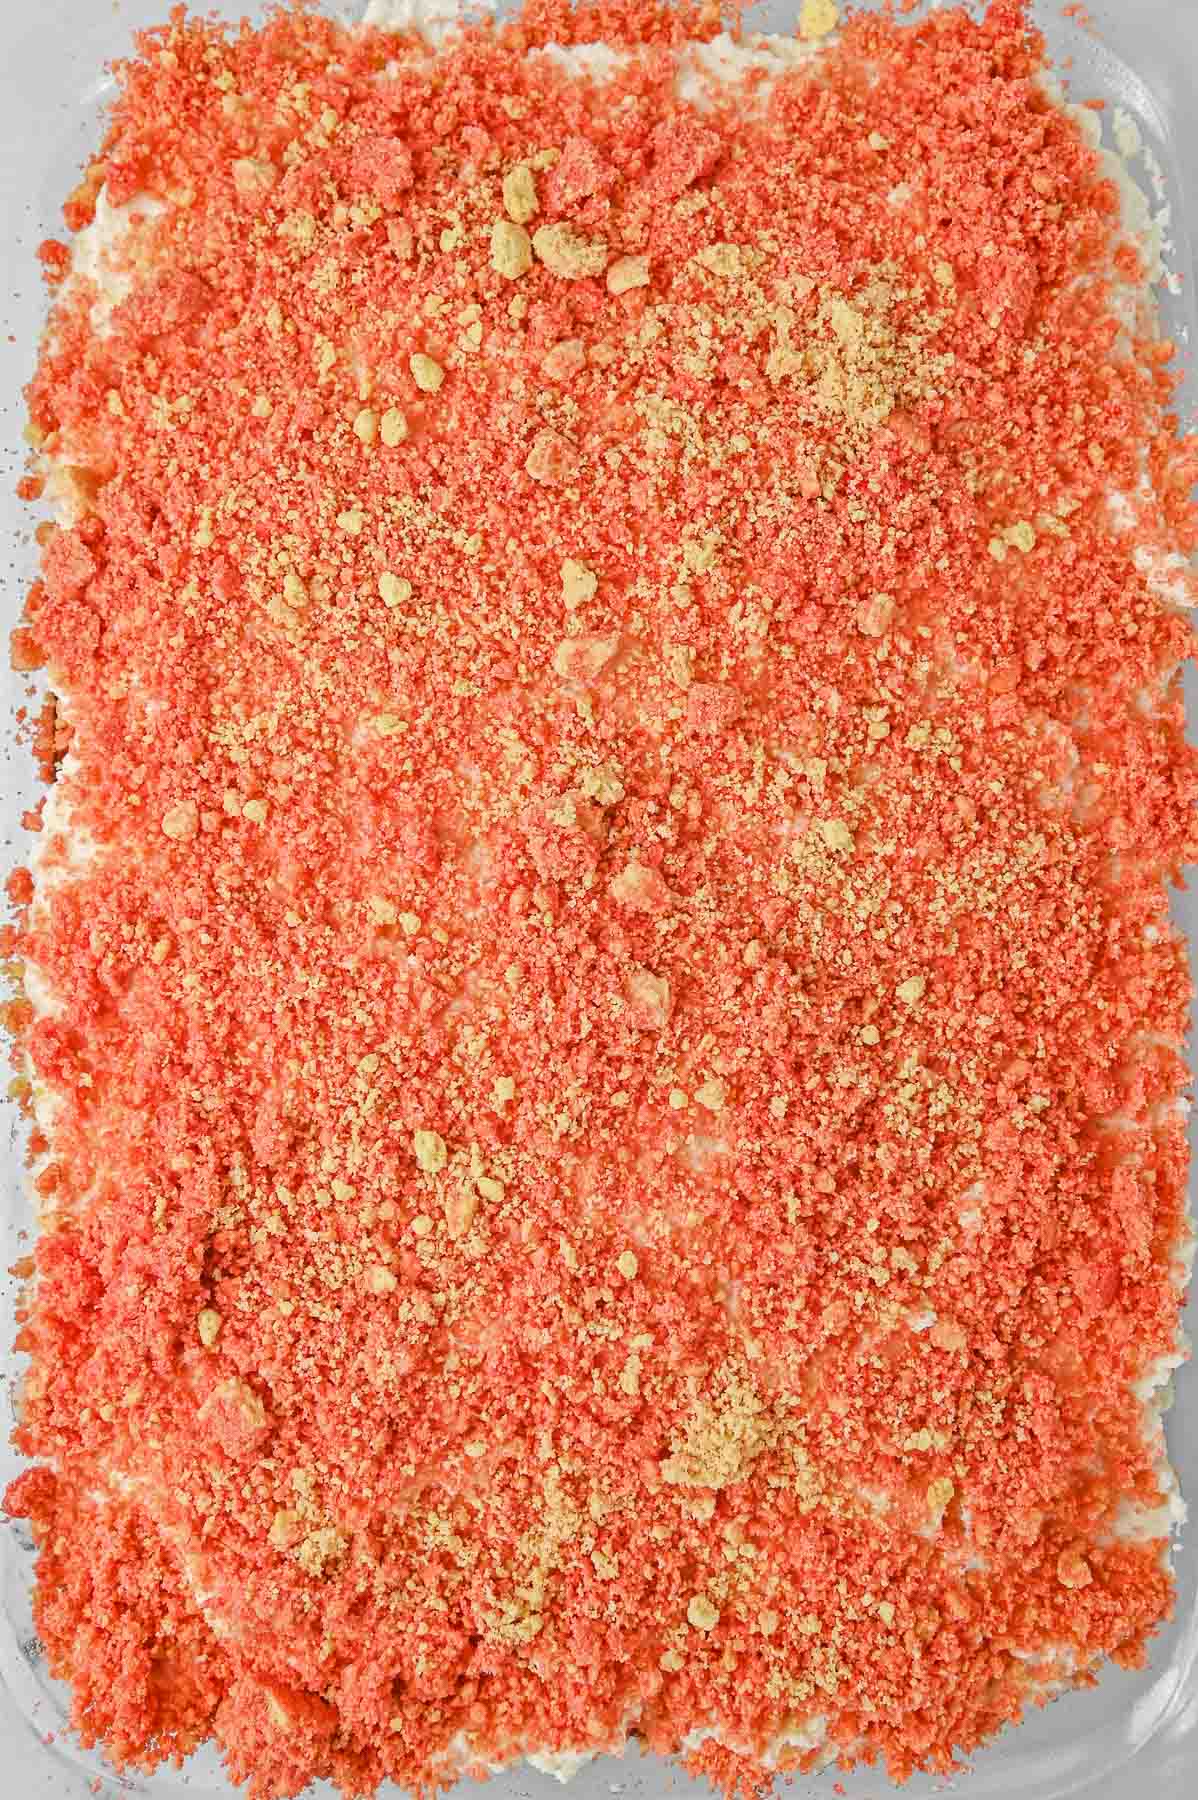 Crumb topping spread over cake mix in cake pan.